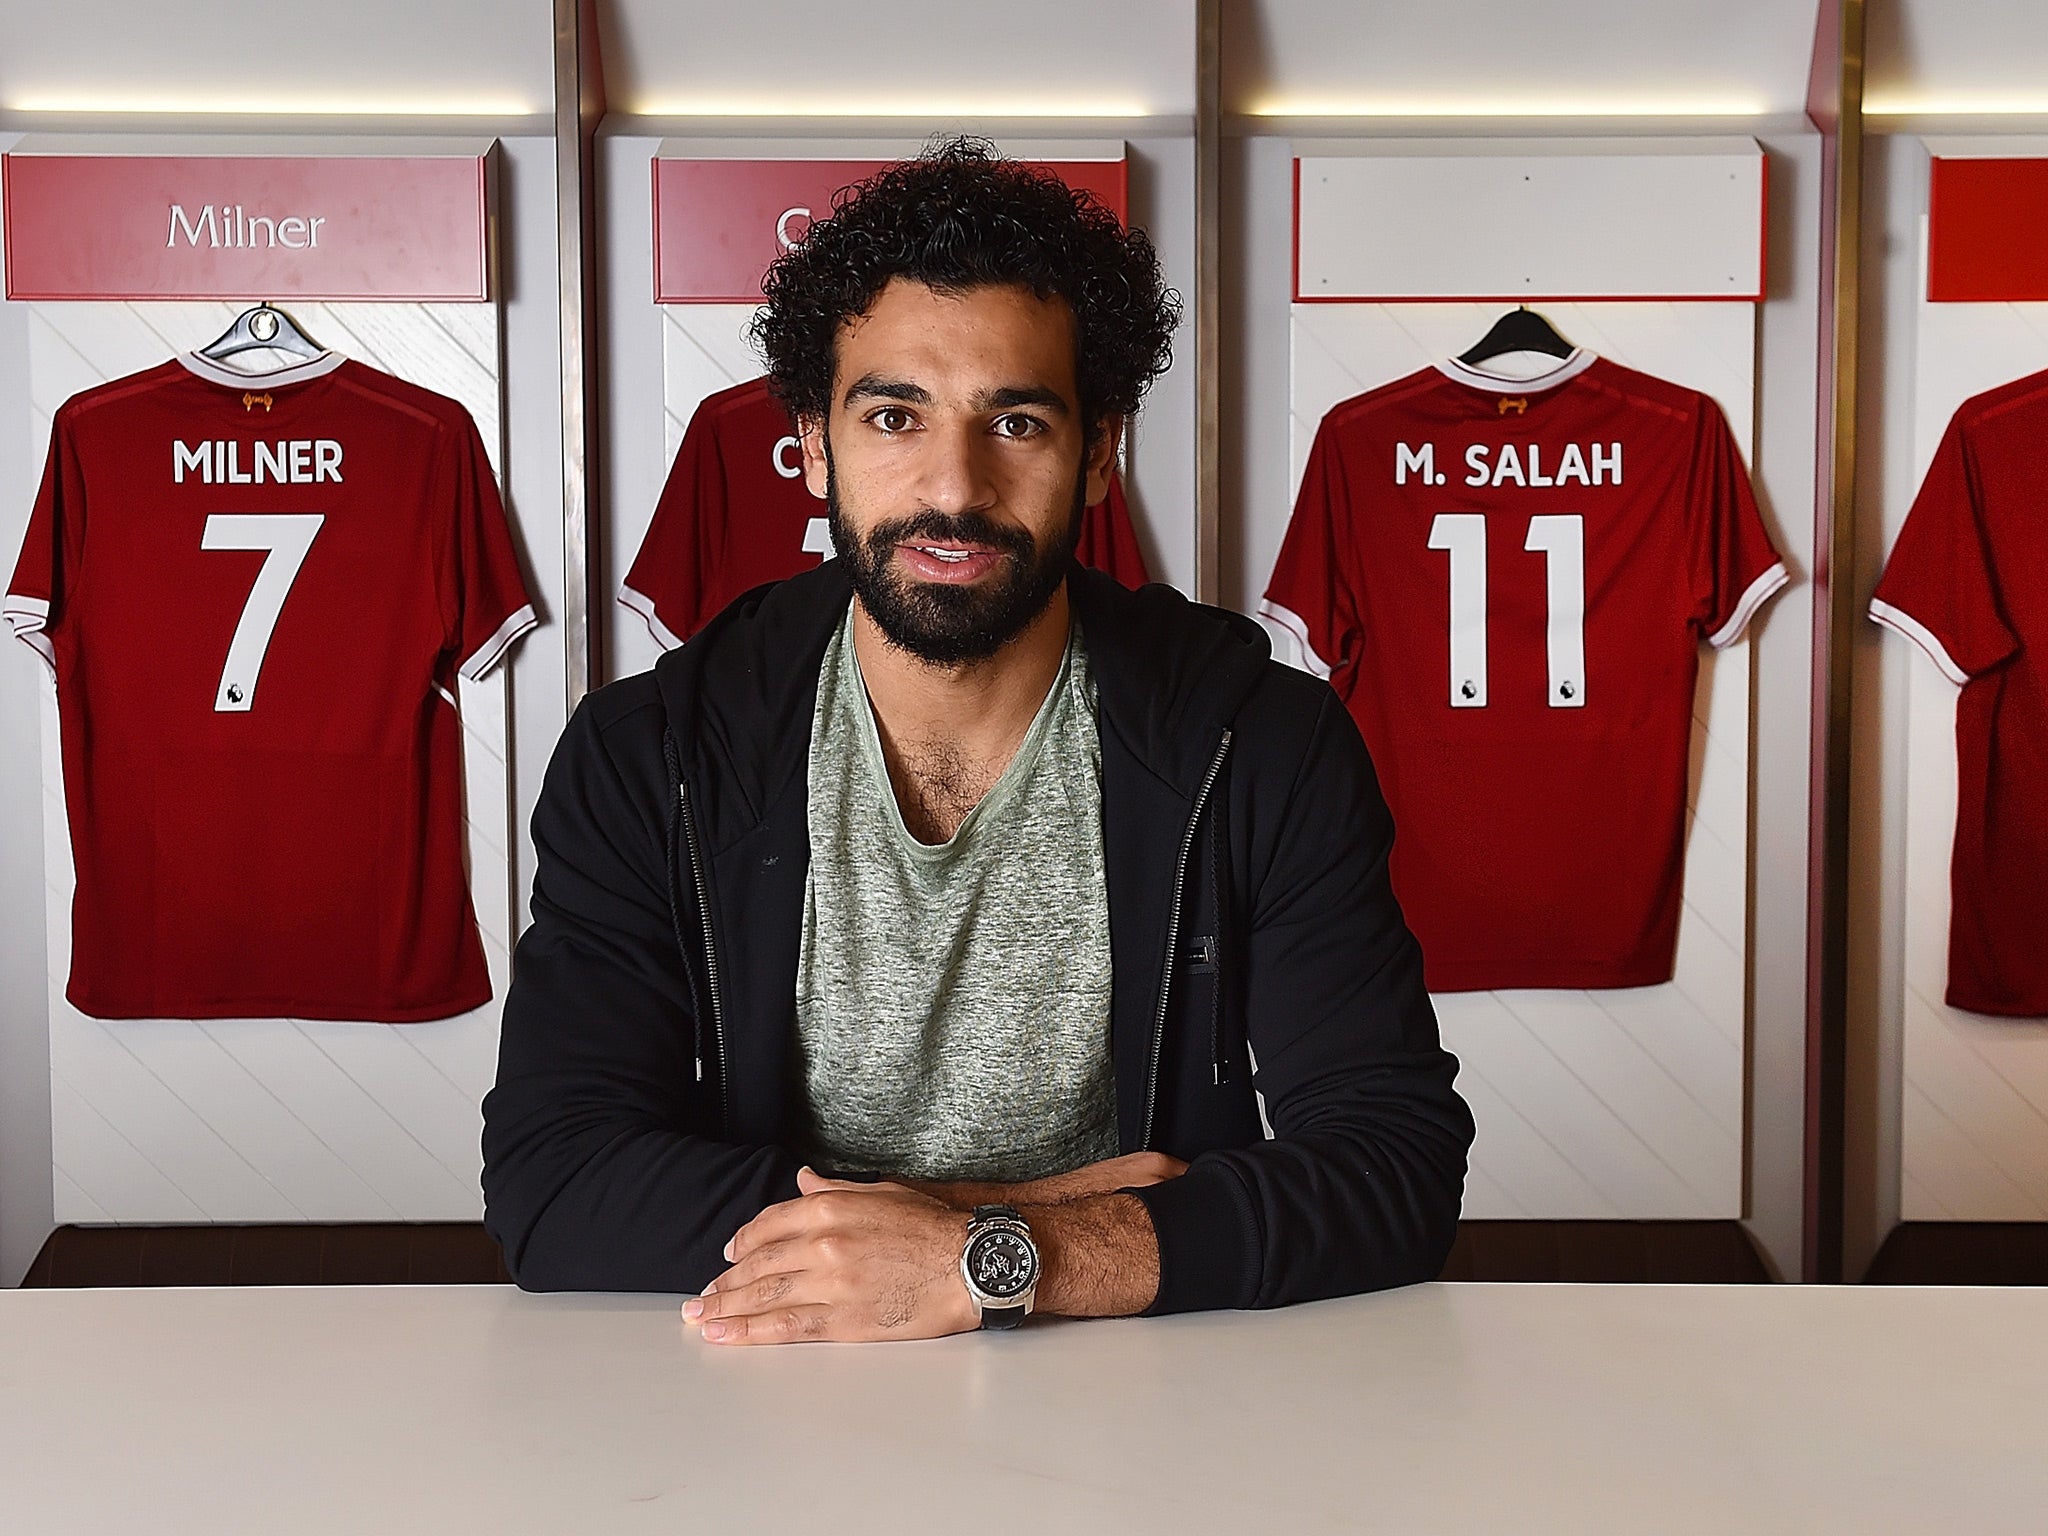 Mohamed Salah joined Liverpool from Roma in a £34.3m deal last week